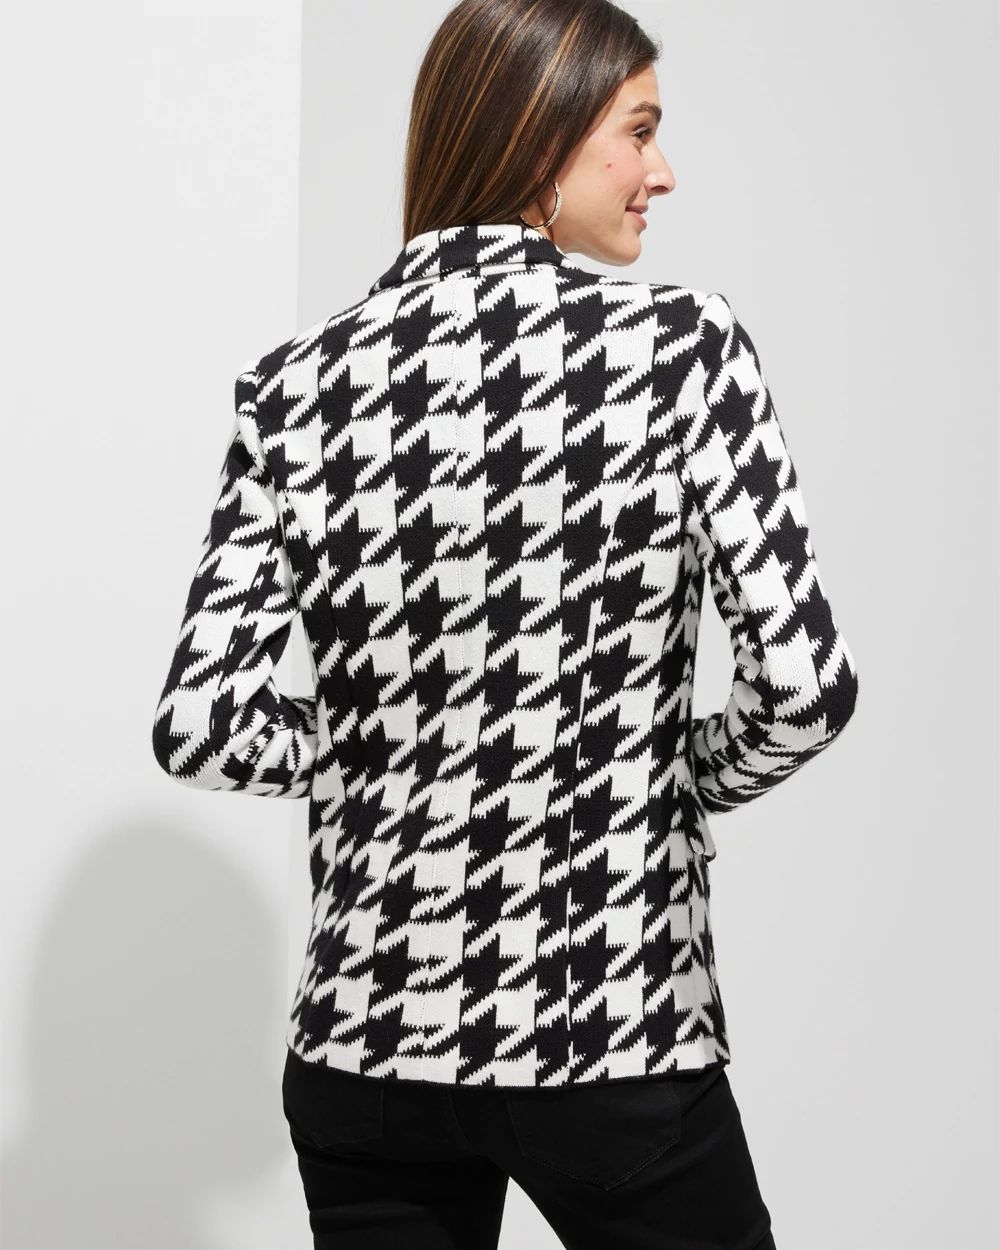 Outlet WHBM Houndstooth Sweater Jacket click to view larger image.